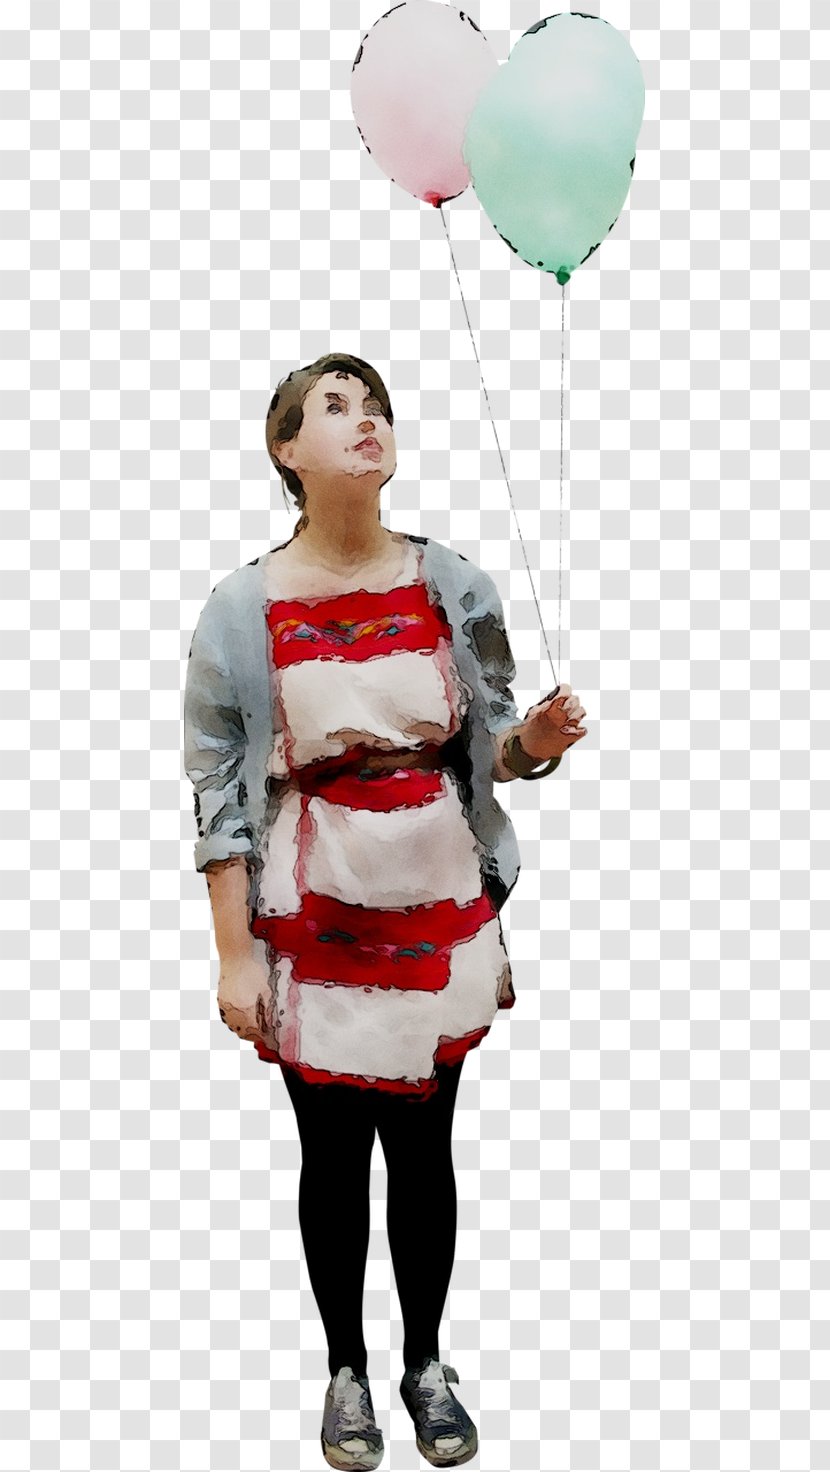 Illustration Balloon - Costume - Clothing Transparent PNG